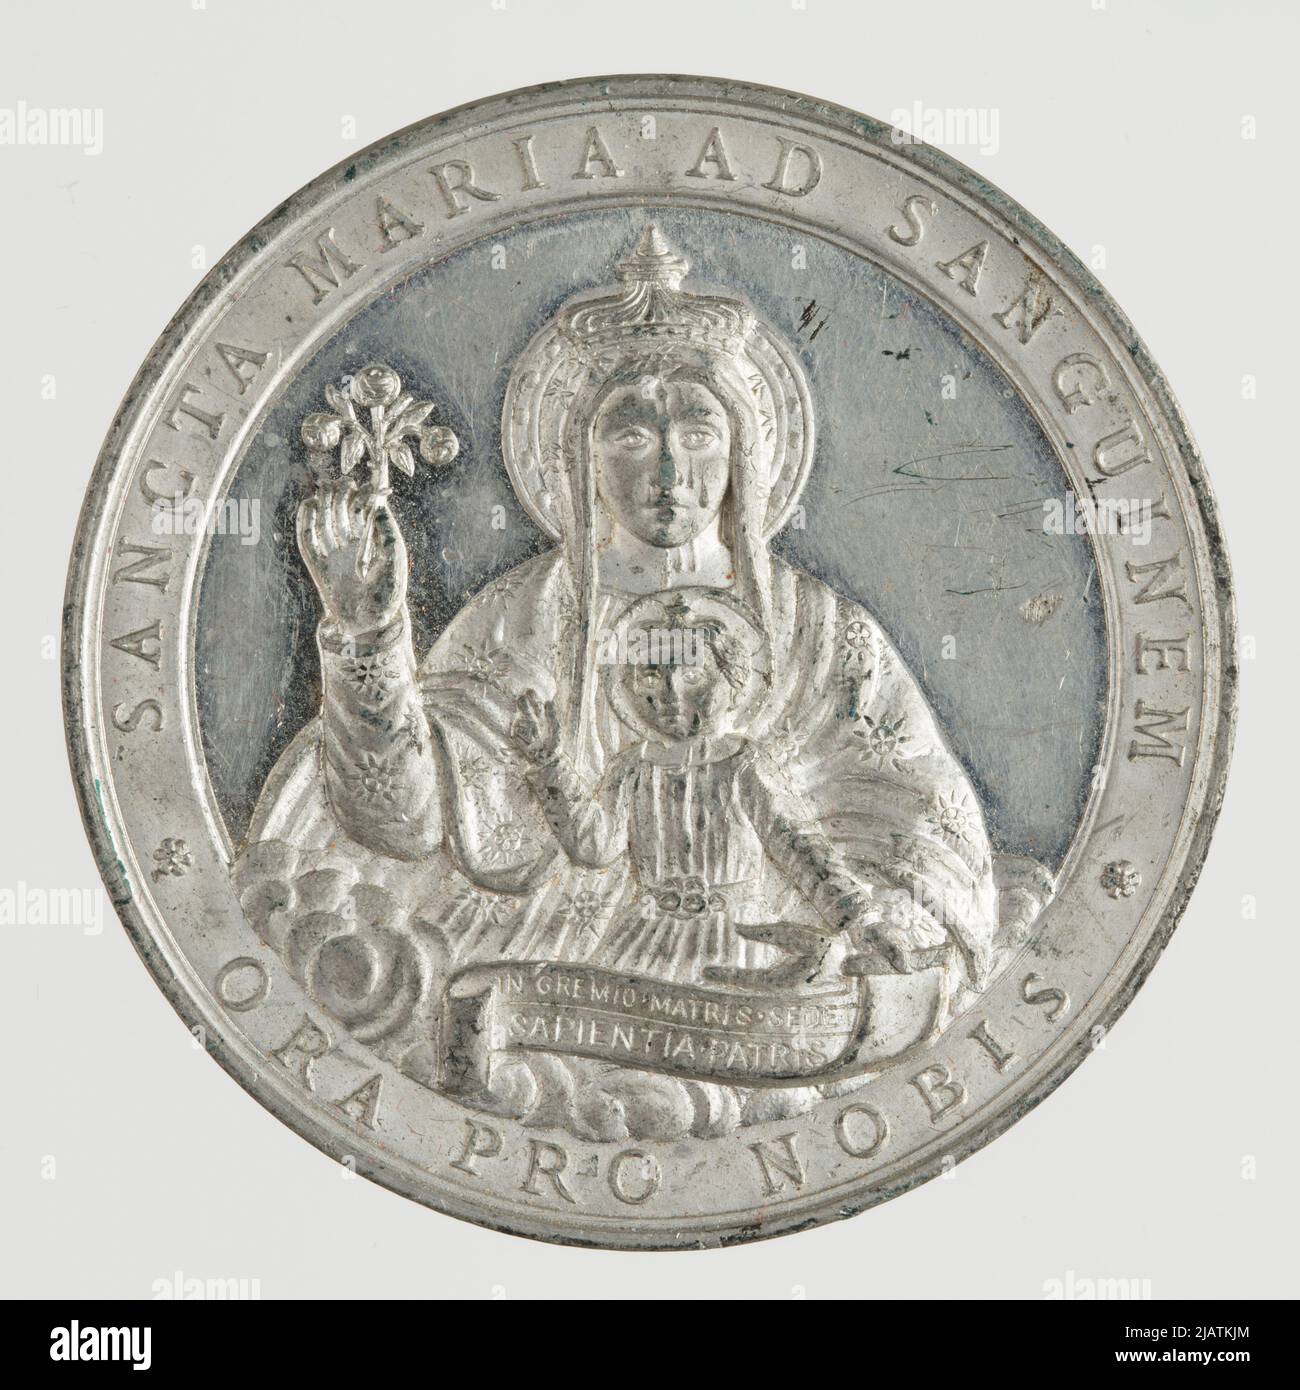 Medal commemorating the 400th anniversary of the Madonna Del Sanguue sanctuary in Johnson, Stefano Stock Photo